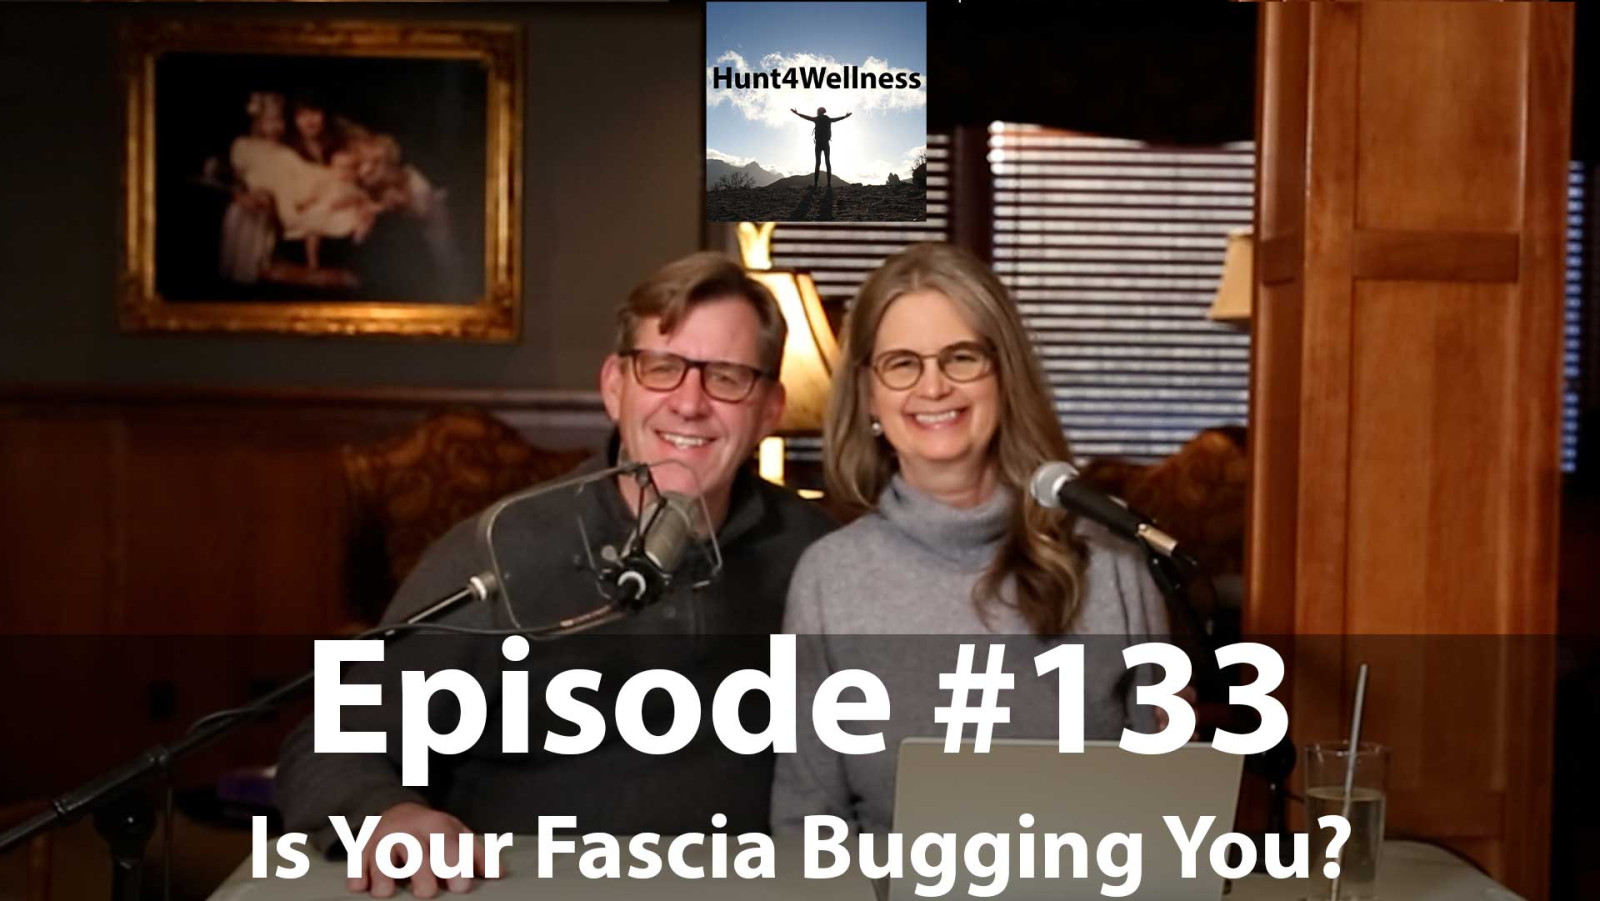 Episode #133 - Is Your Fascia Bugging You?